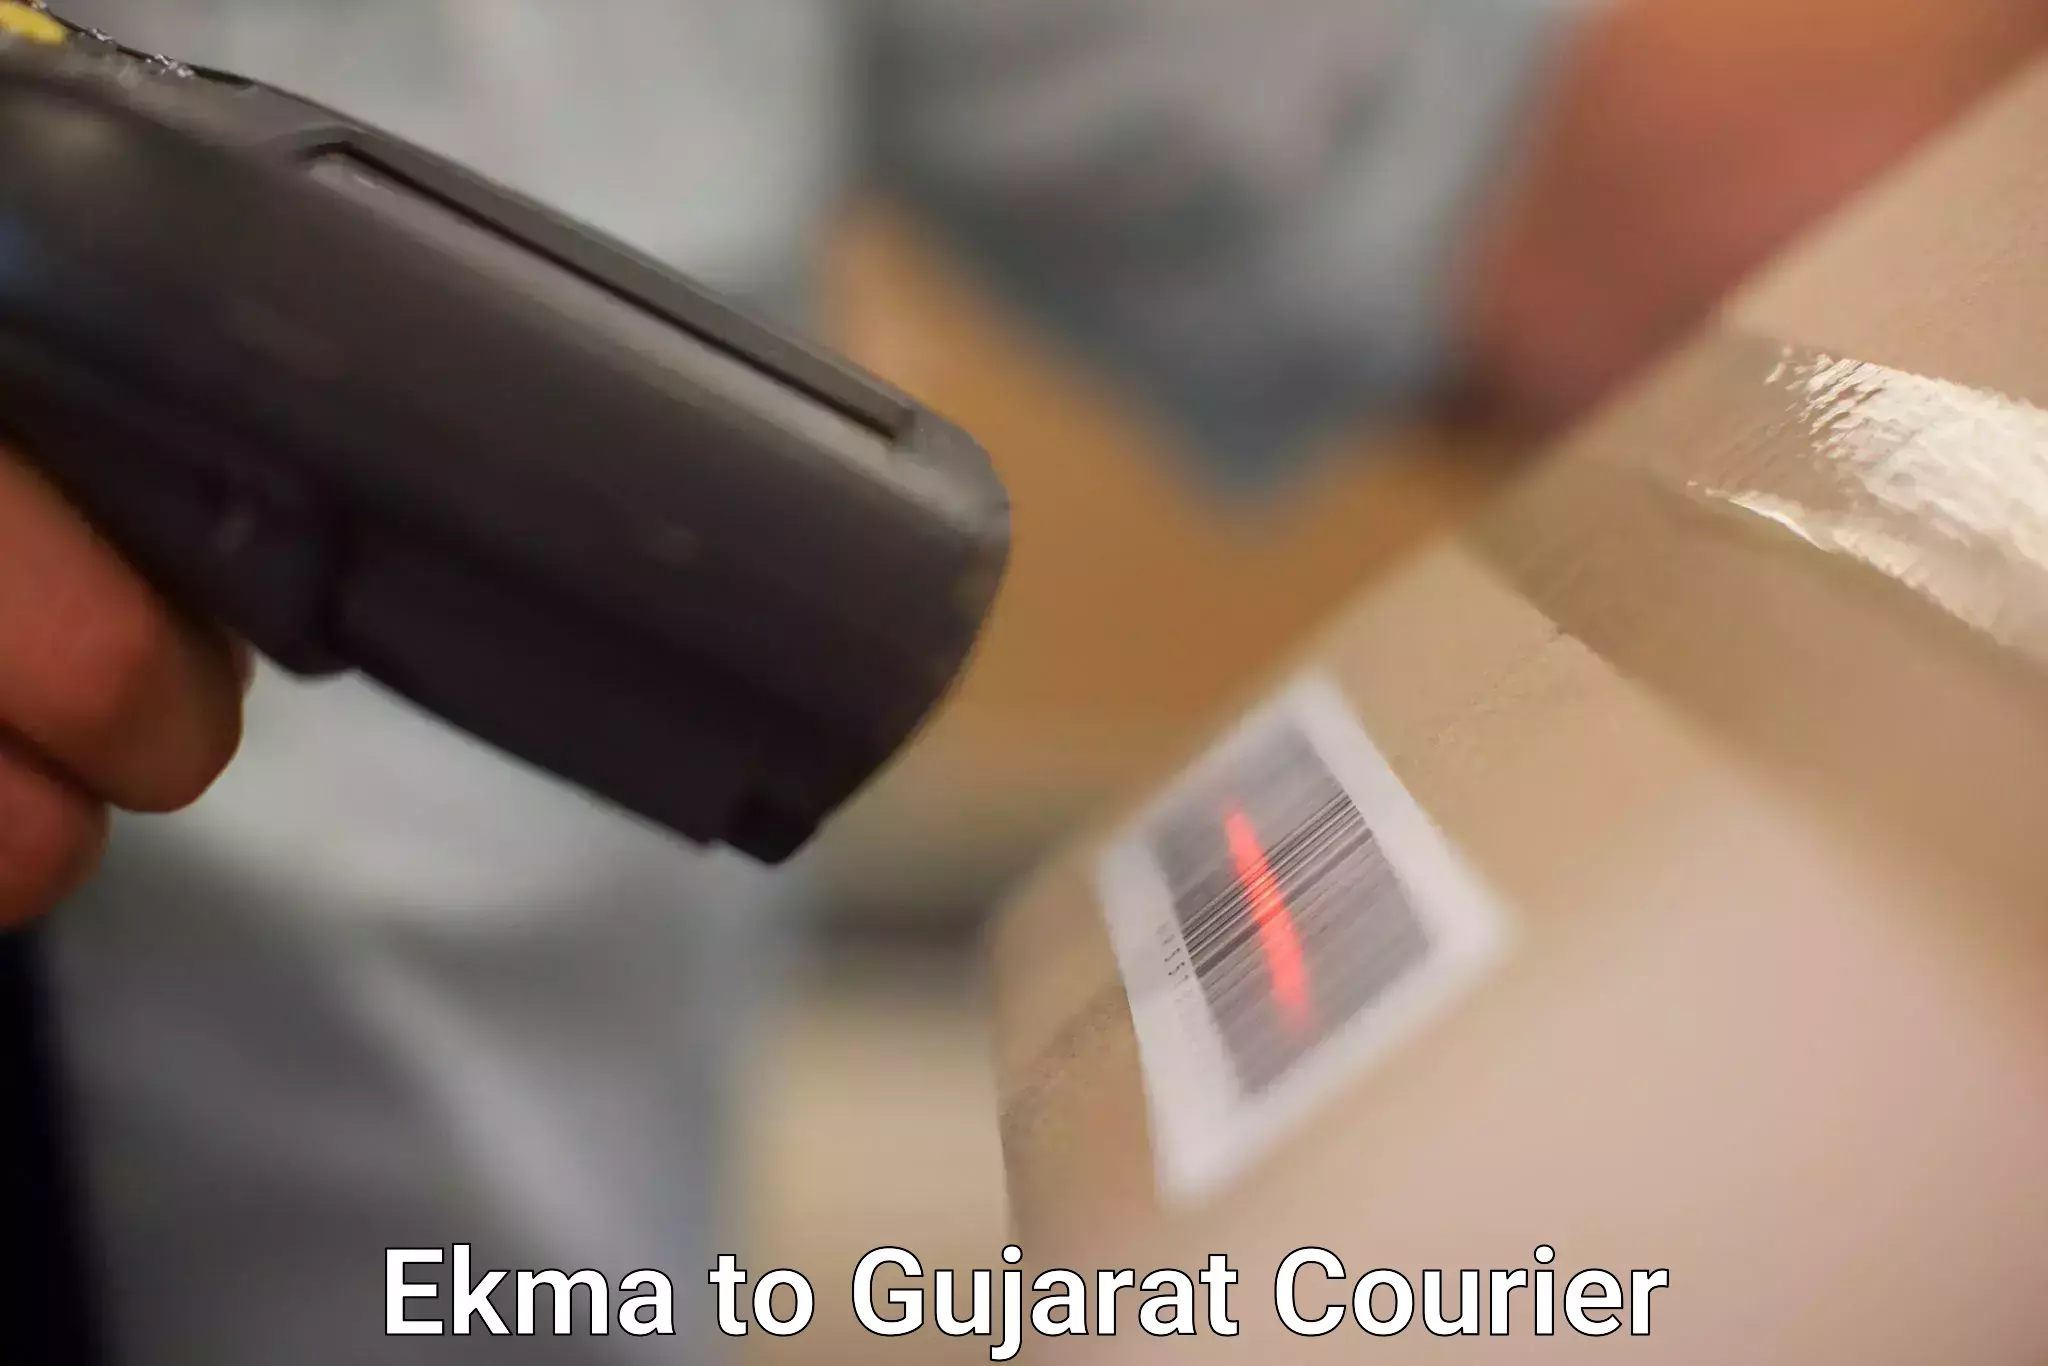 Package delivery network Ekma to Gandhinagar